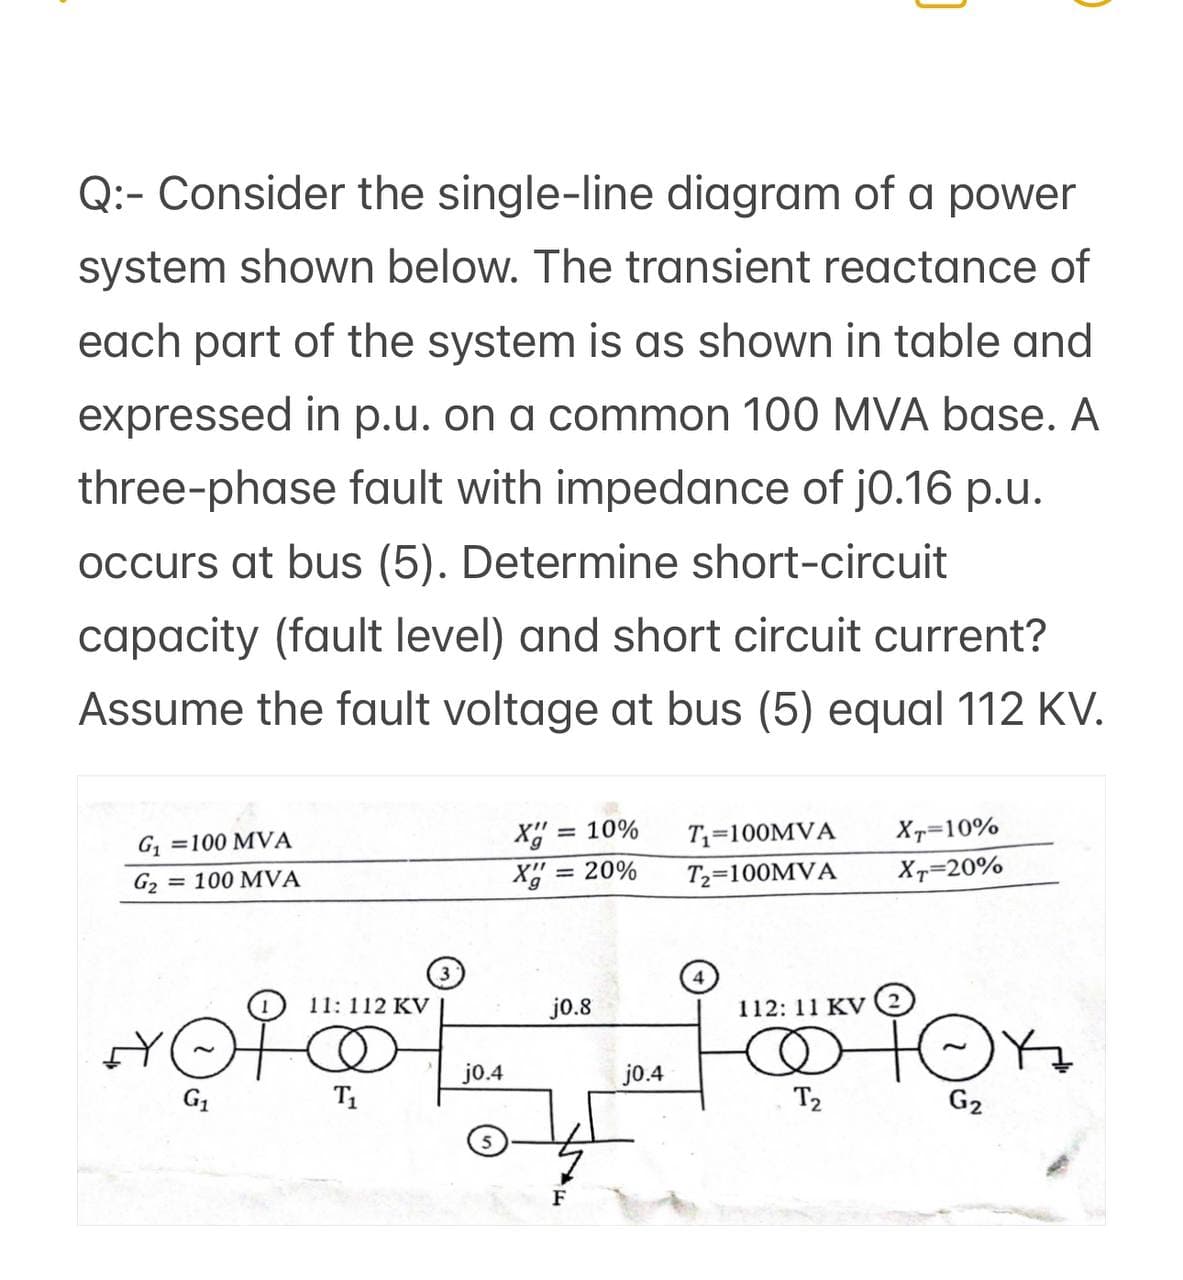 Q:- Consider the single-line diagram of a power
system shown below. The transient reactance of
each part of the system is as shown in table and
expressed in p.u. on a common 100 MVA base. A
three-phase fault with impedance of j0.16 p.u.
occurs at bus (5). Determine short-circuit
capacity (fault level) and short circuit current?
Assume the fault voltage at bus (5) equal 112 KV.
G₁ =100 MVA
G₂= 100 MVA
X = 10%
= 20%
Xg=
j0.4
j0.8
11:112 KV
112: 11 KV
notot foton
Y
HO
T₂
G₂
G₁
T₁
T₁=100MVA
T₂=100MVA
j0.4
XT=10%
XT=20%